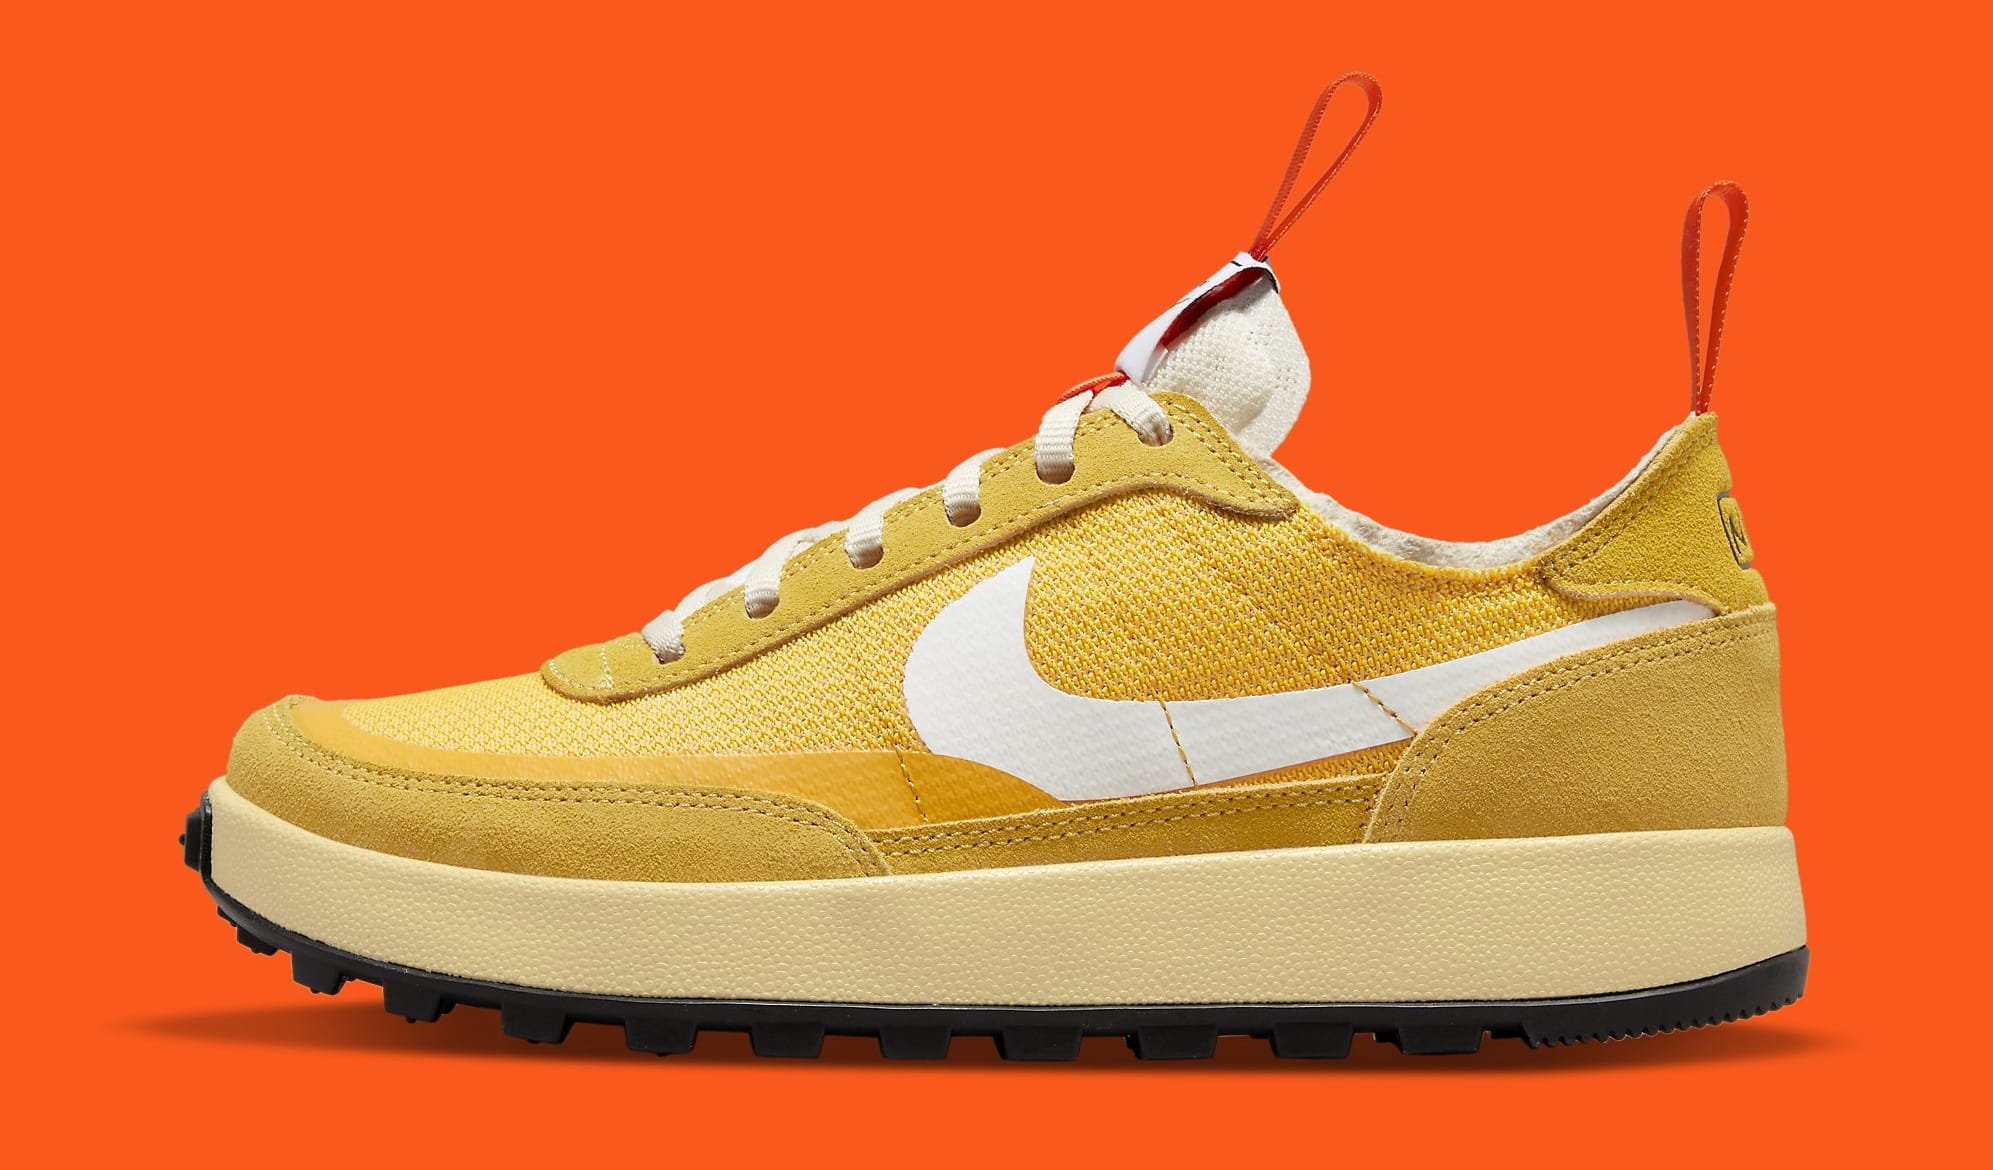 The Release for Nike and Tom Sachs's New “Boring” Sneaker Was Anything But